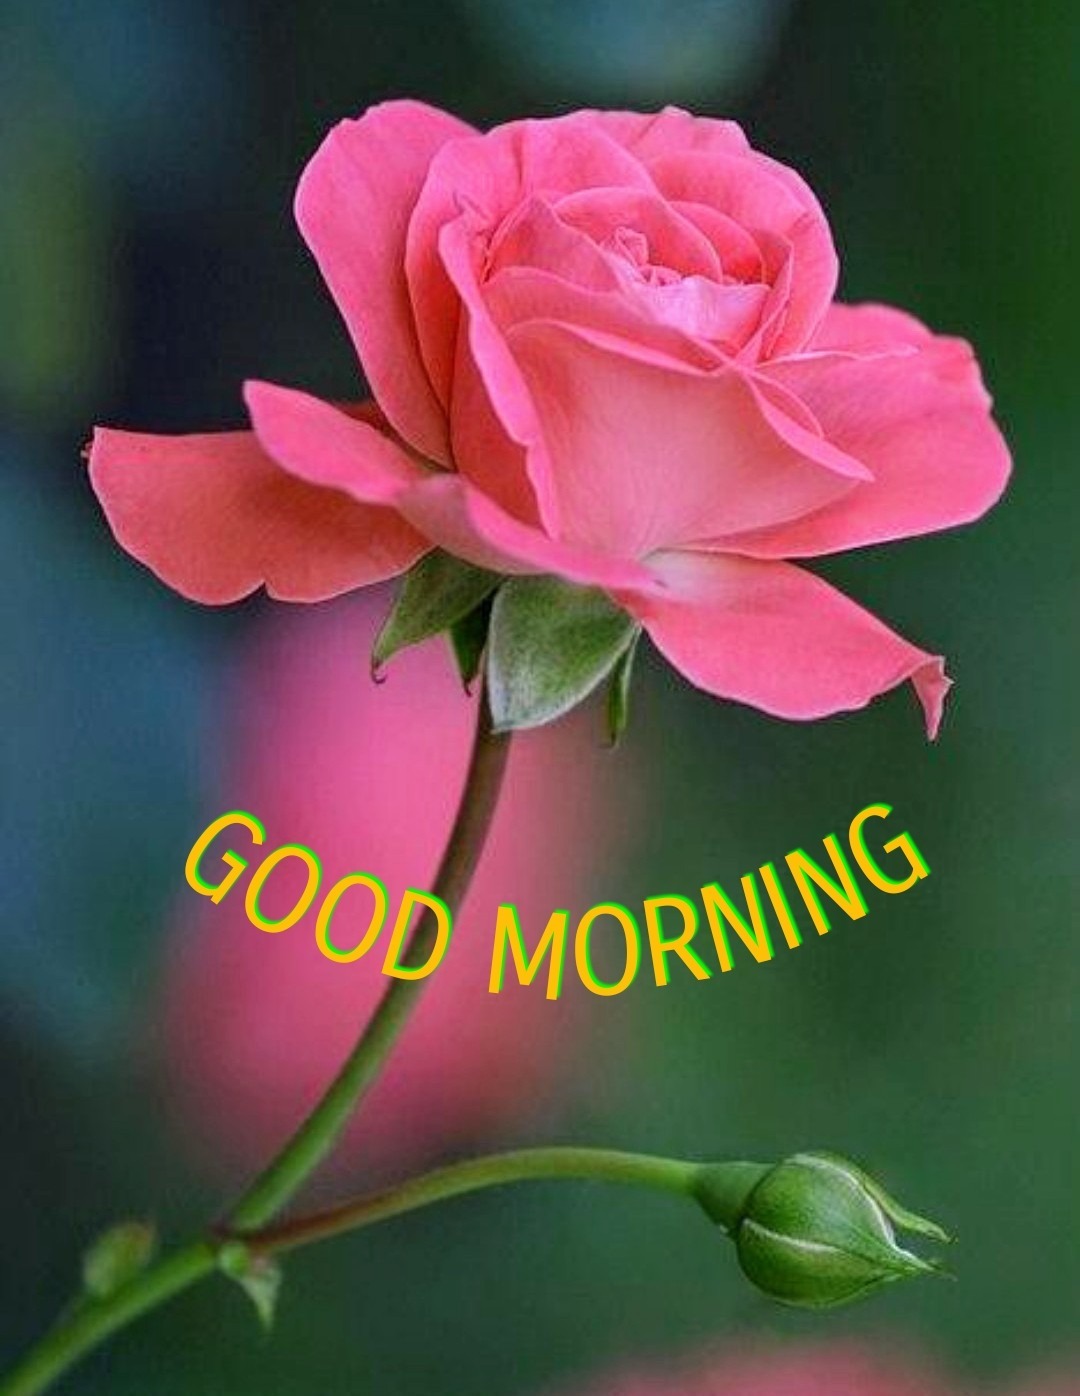 Good Morning With Pink Rose - DesiComments.com